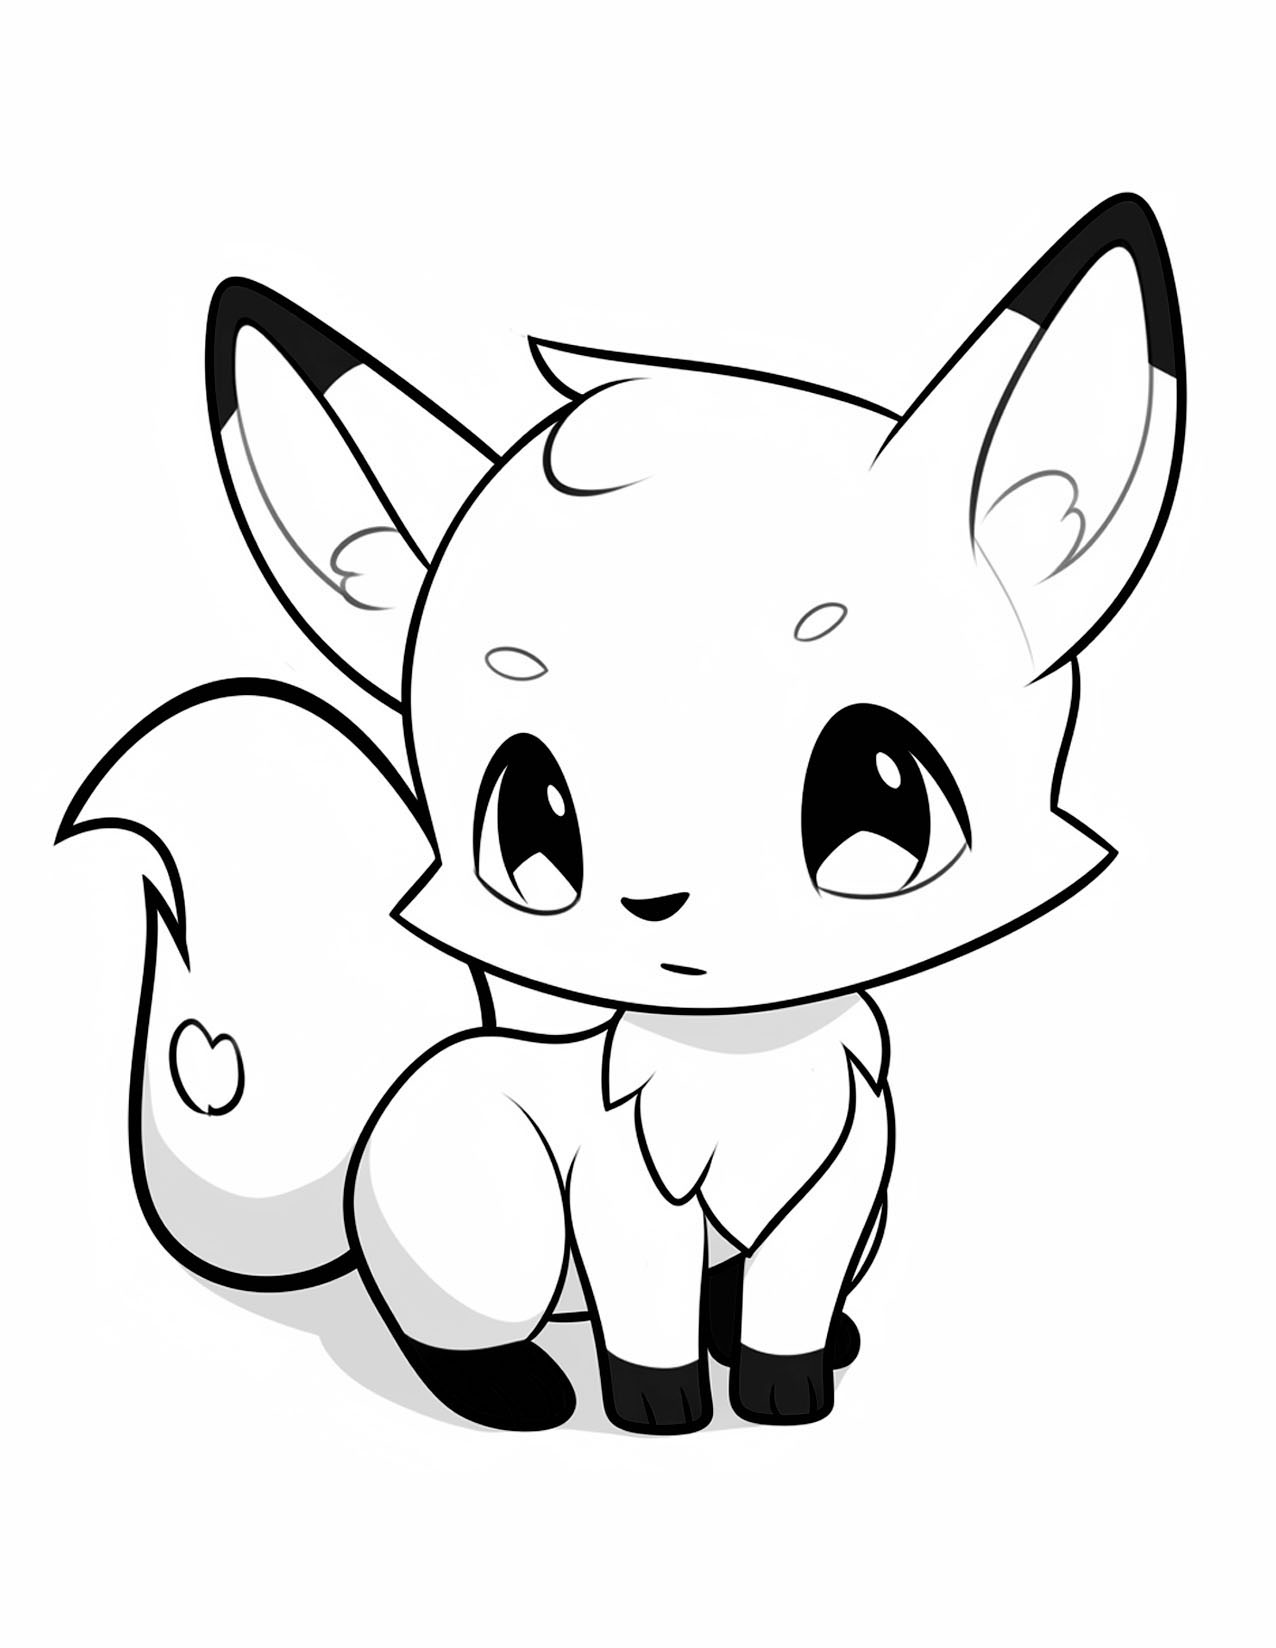 Creative fox coloring pages for kids and adults